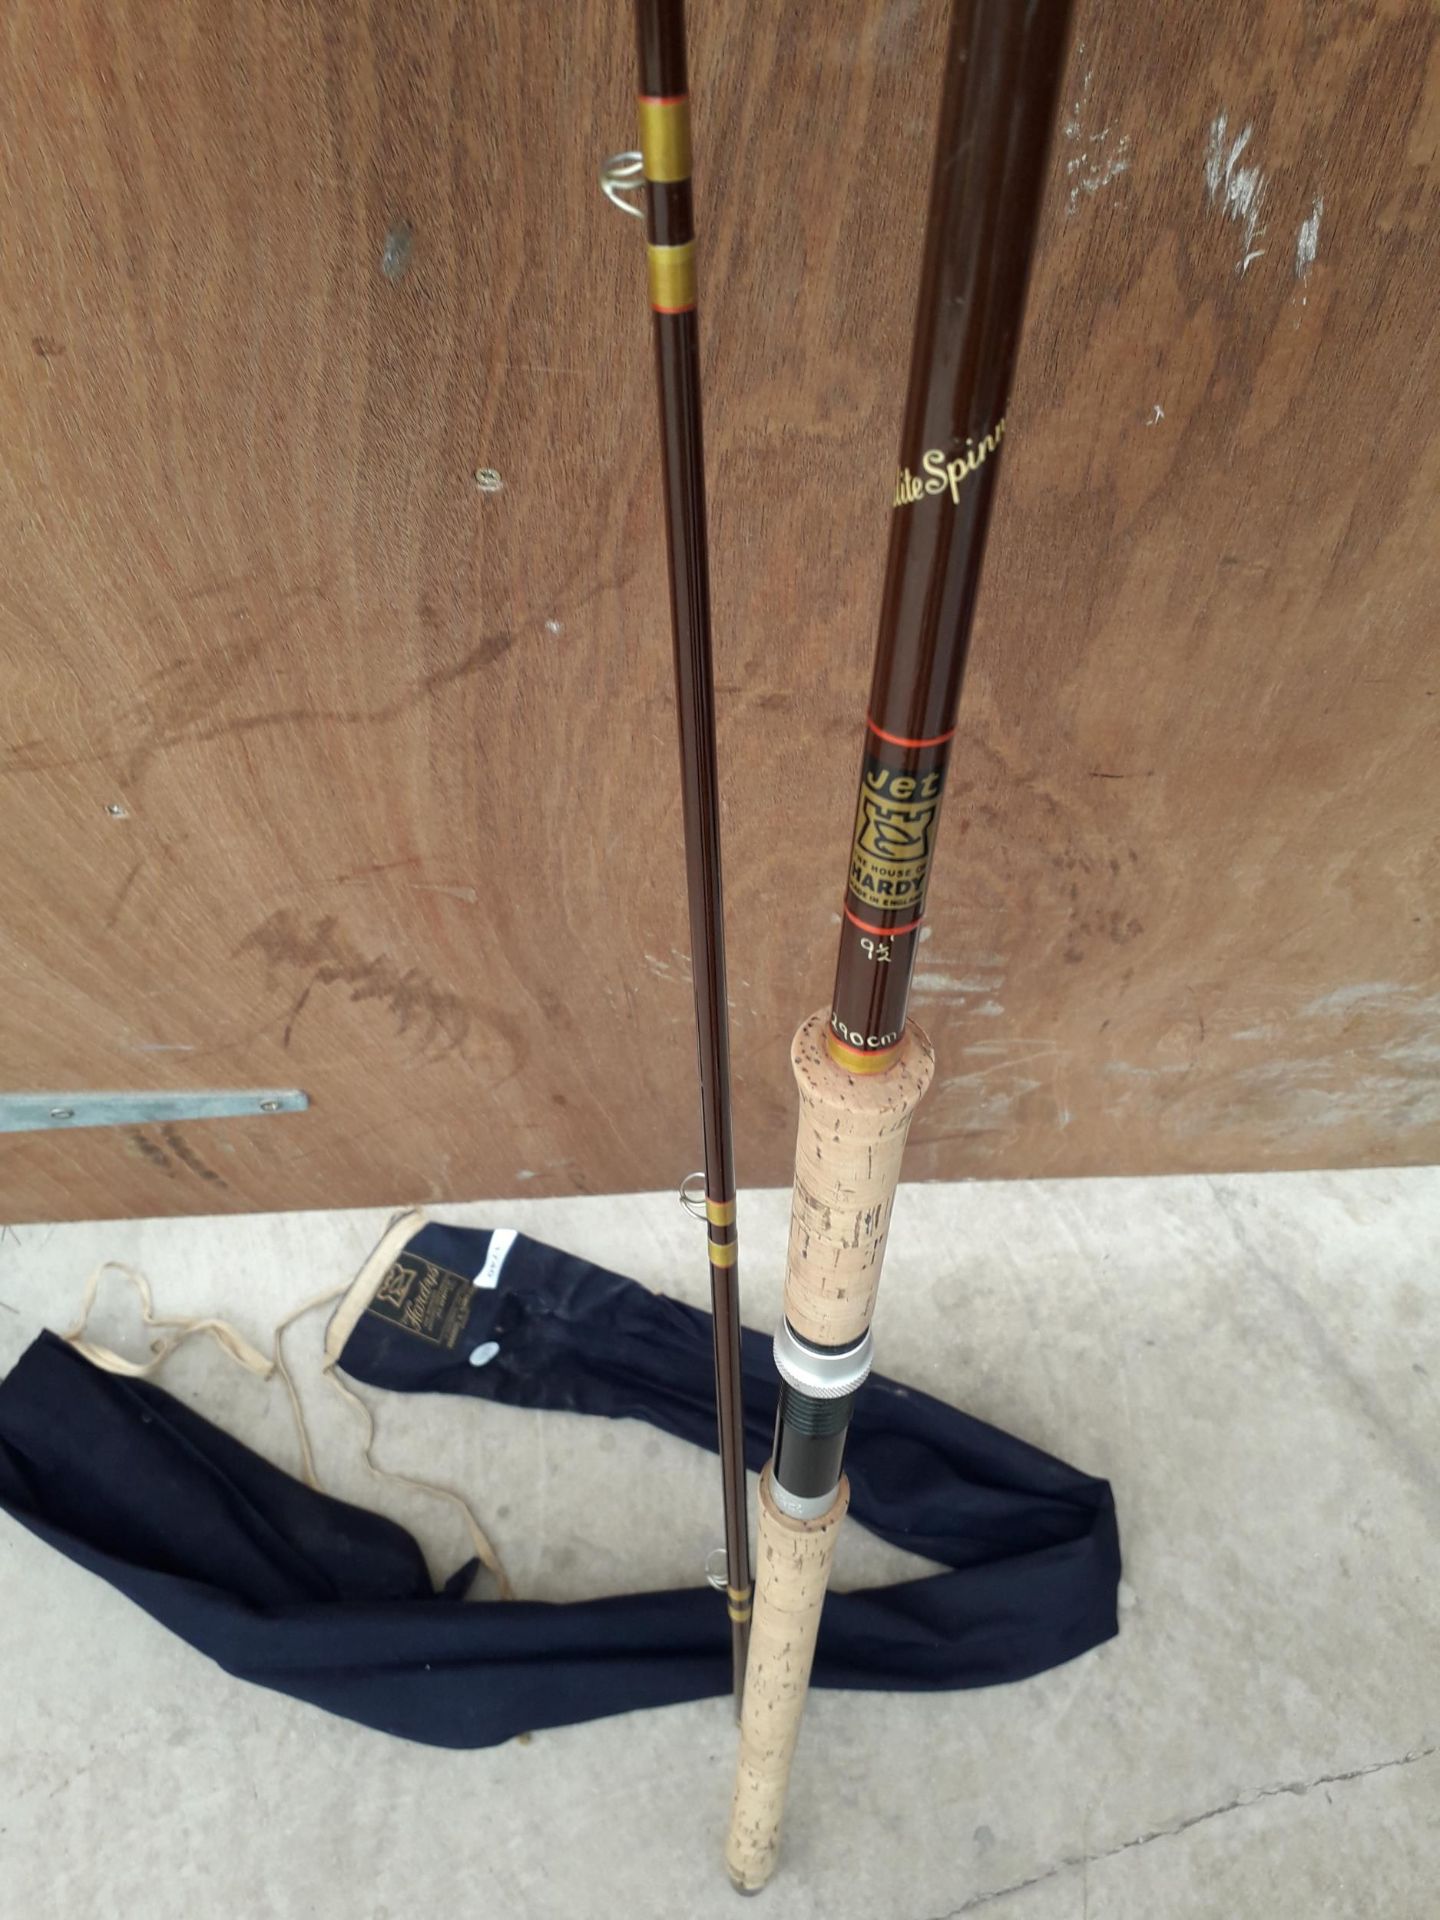 A HARDY JET 9.5' FIBALITE SPINING FISHING ROD IN ORIGINAL BAG - Image 3 of 4